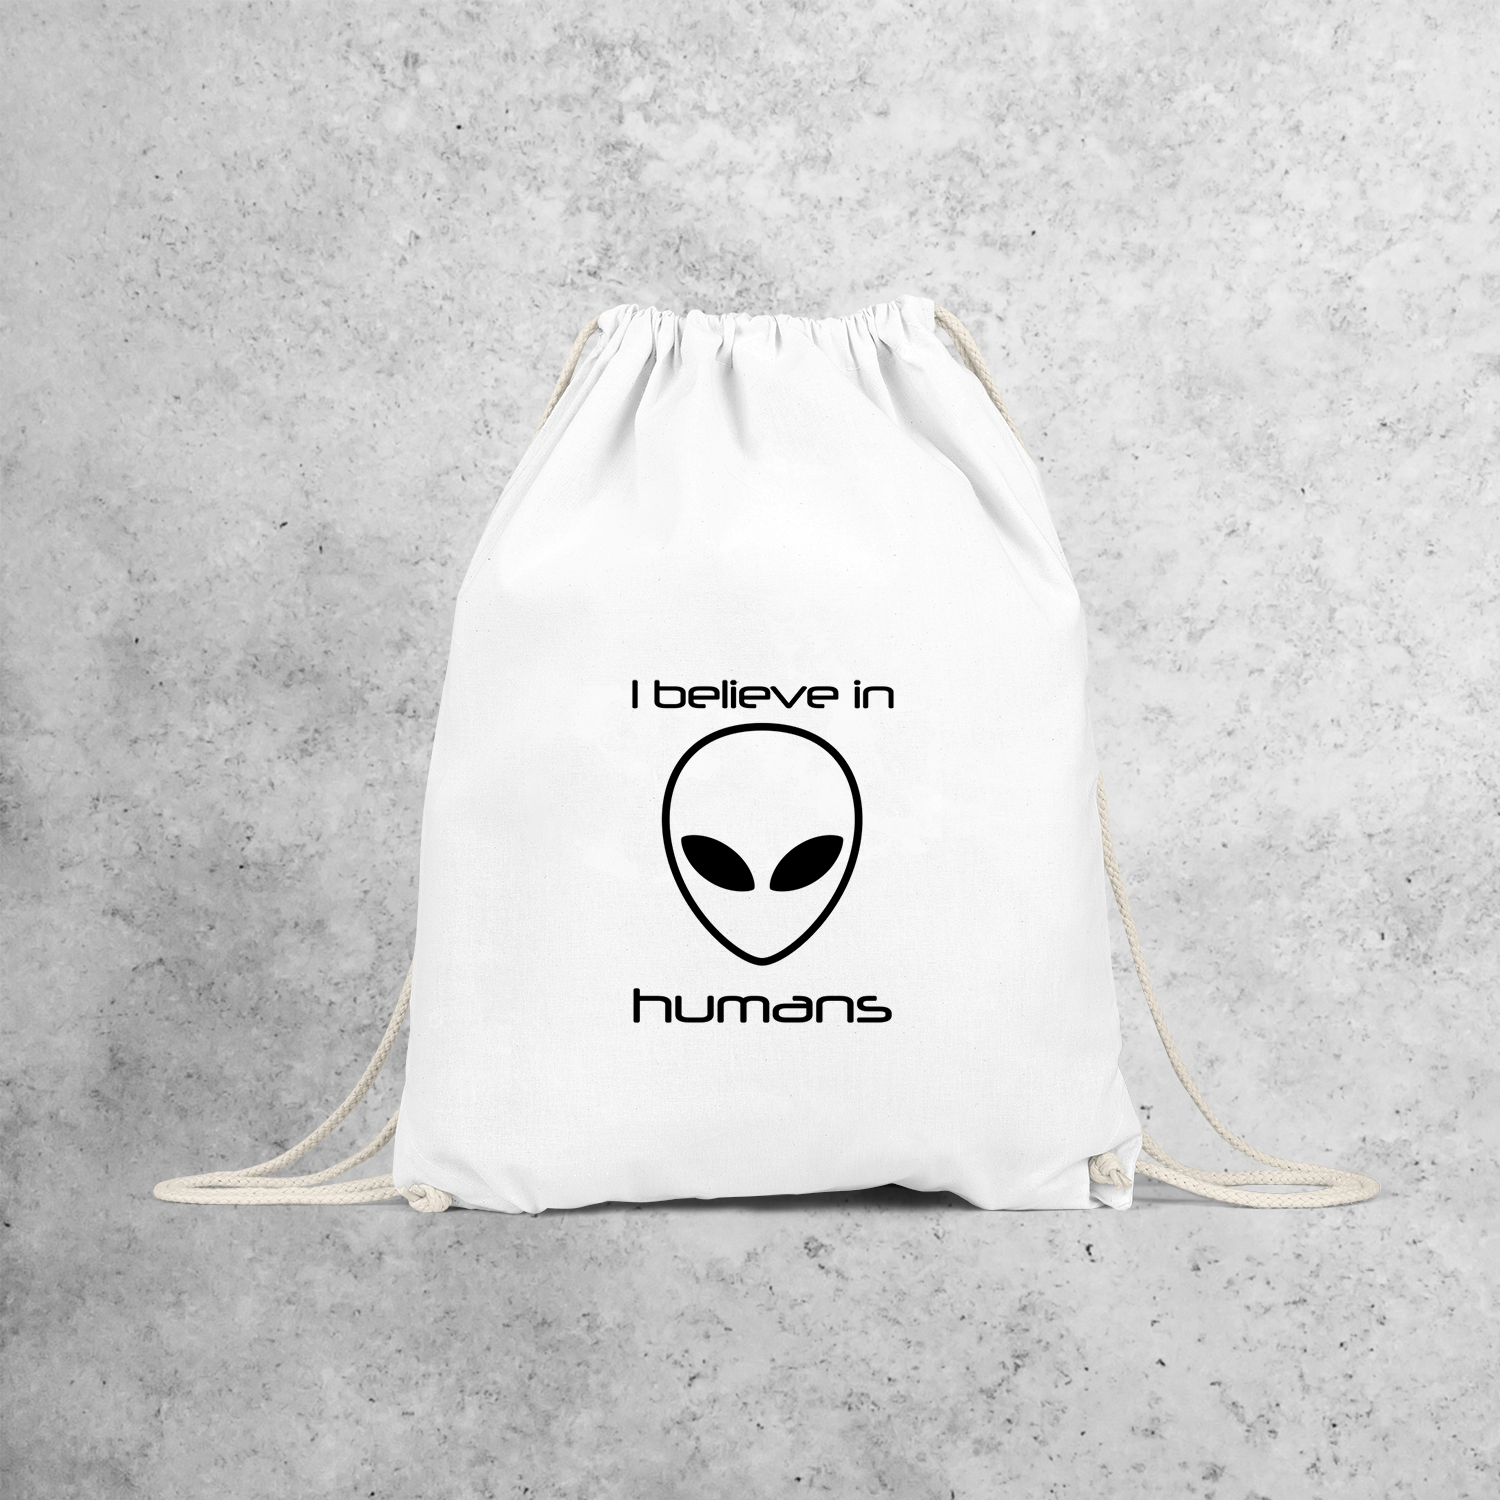 'I believe in humans' backpack